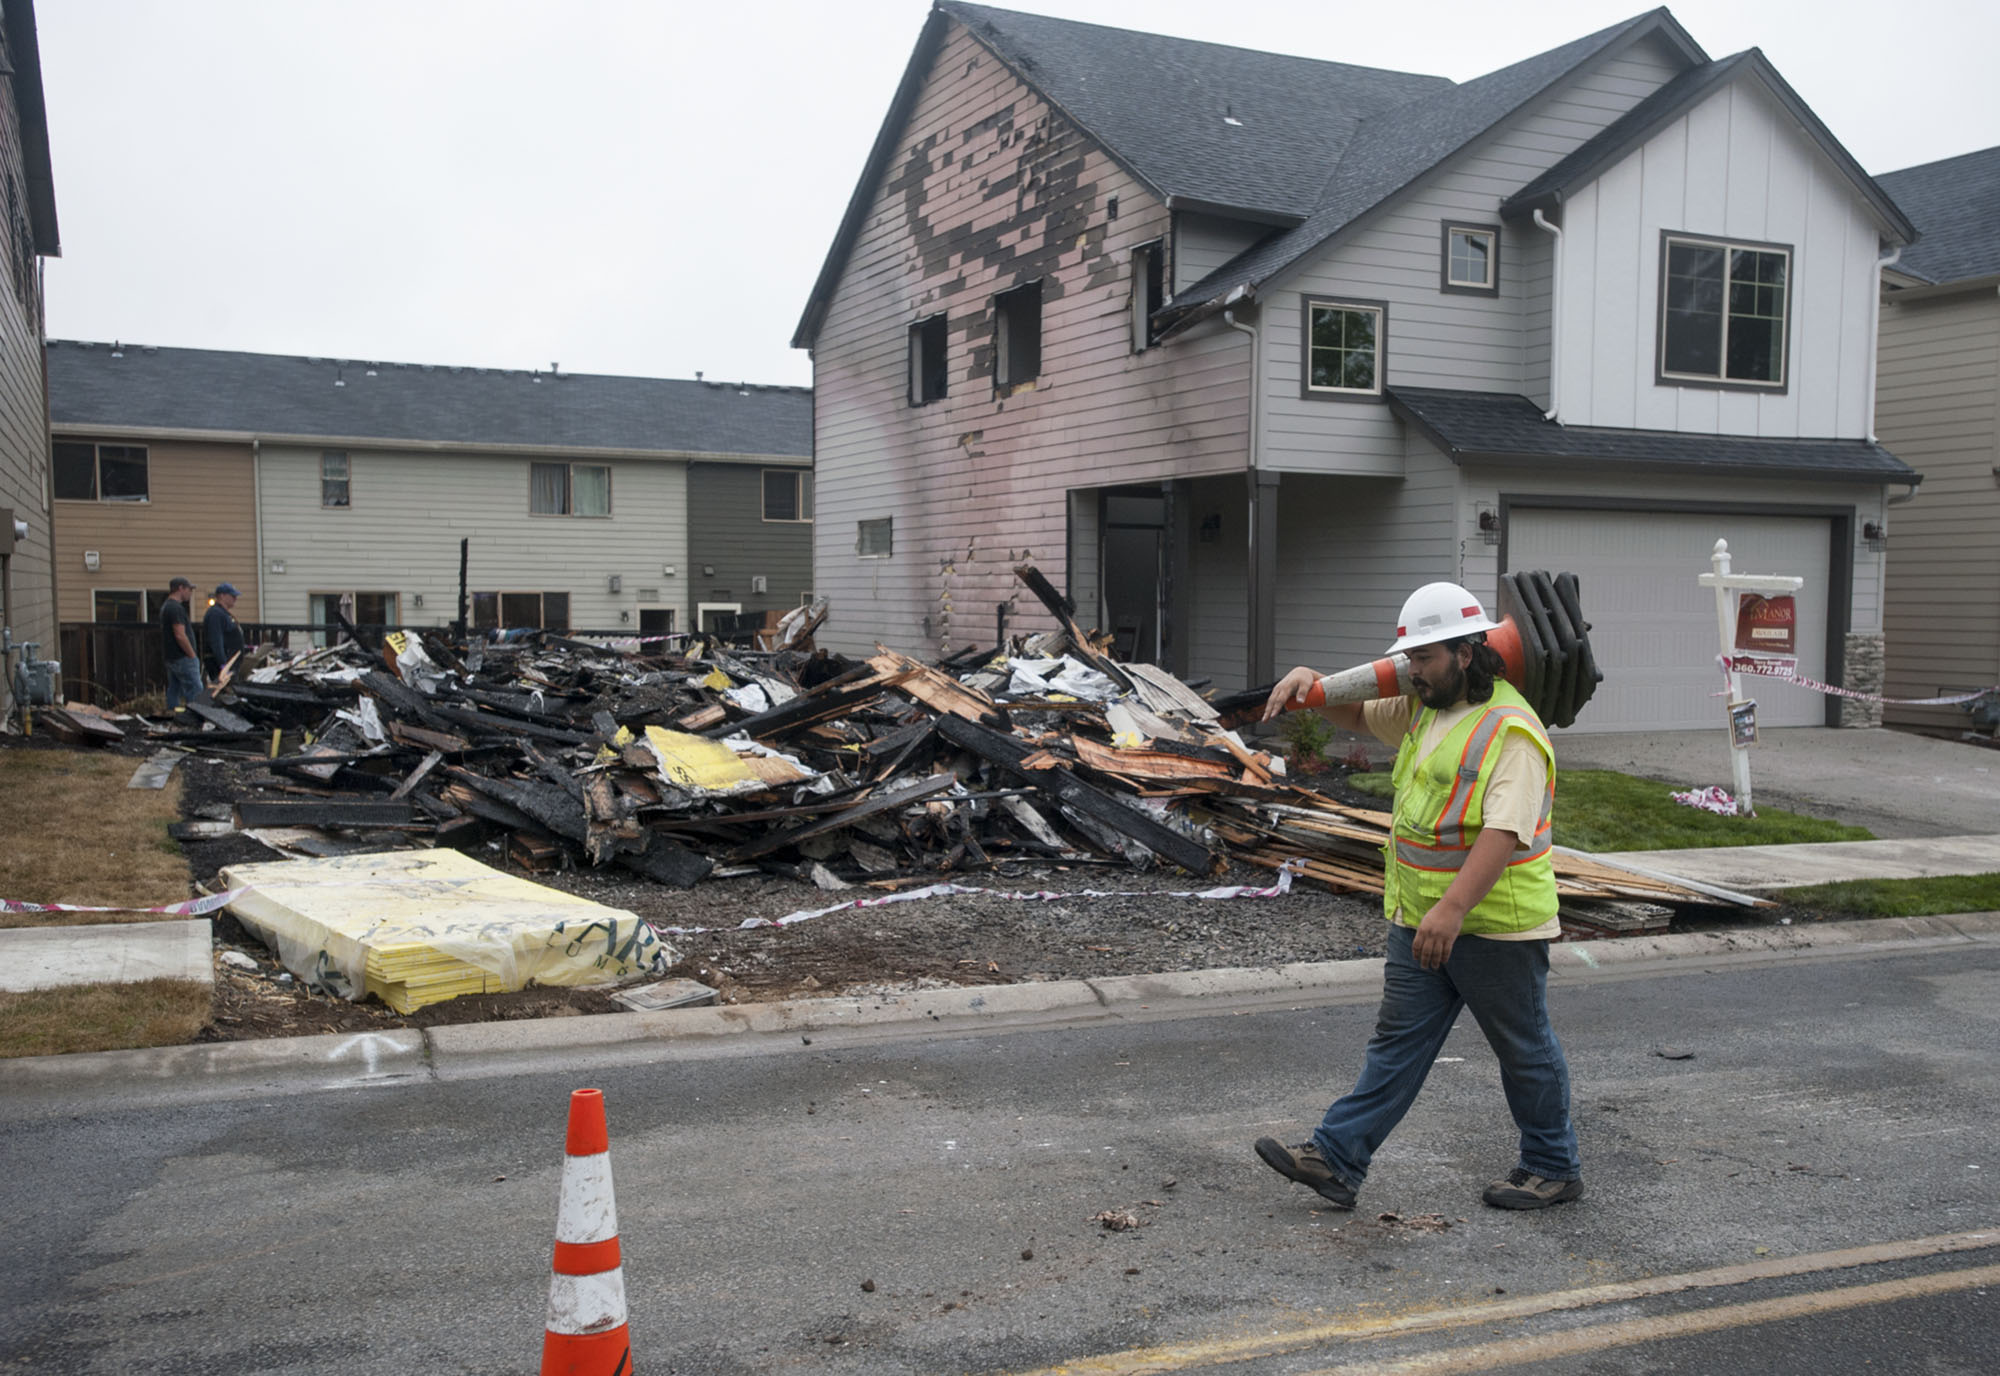 Matthew Zugajewicz of Northwest Traffic Control prepares to set up cones to route traffic around the scene of a fire at a construction site Thursday morning. The fire was reported at about 1:30 a.m. in the 5700 block of Northeast 47th Street.